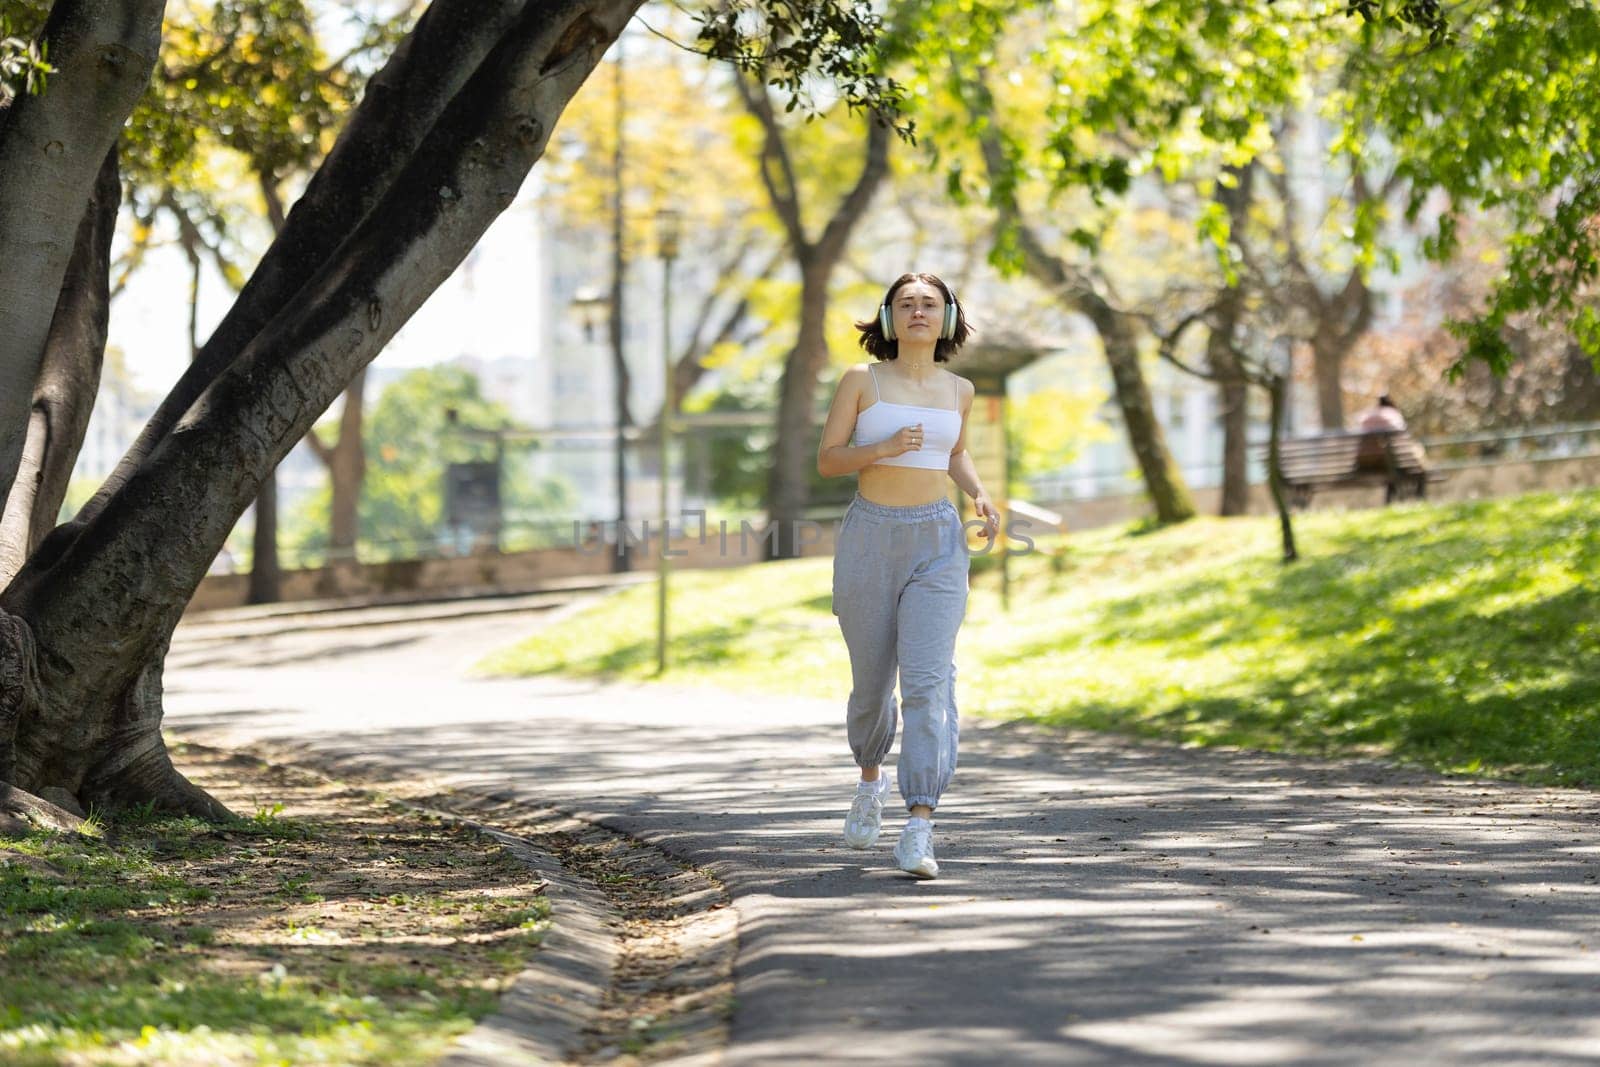 A woman runs on a path in a park. She is wearing headphones and a white tank top